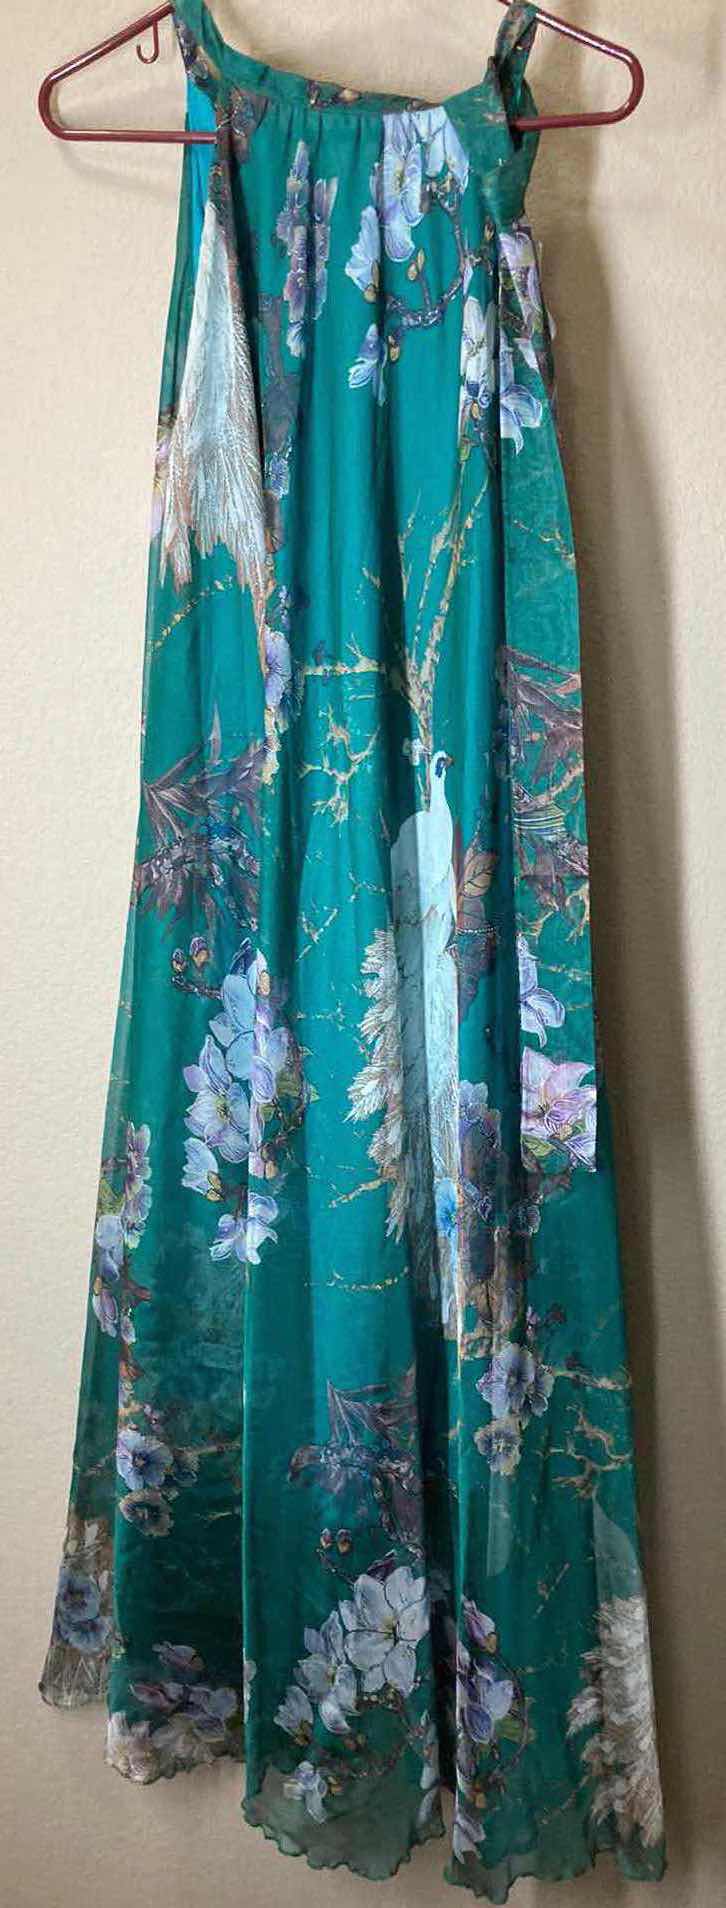 Photo 3 of NEW MEDESHE PEACOCK & FLORAL TRANSPARENT DRESS WOMENS SIZE MEDIUM